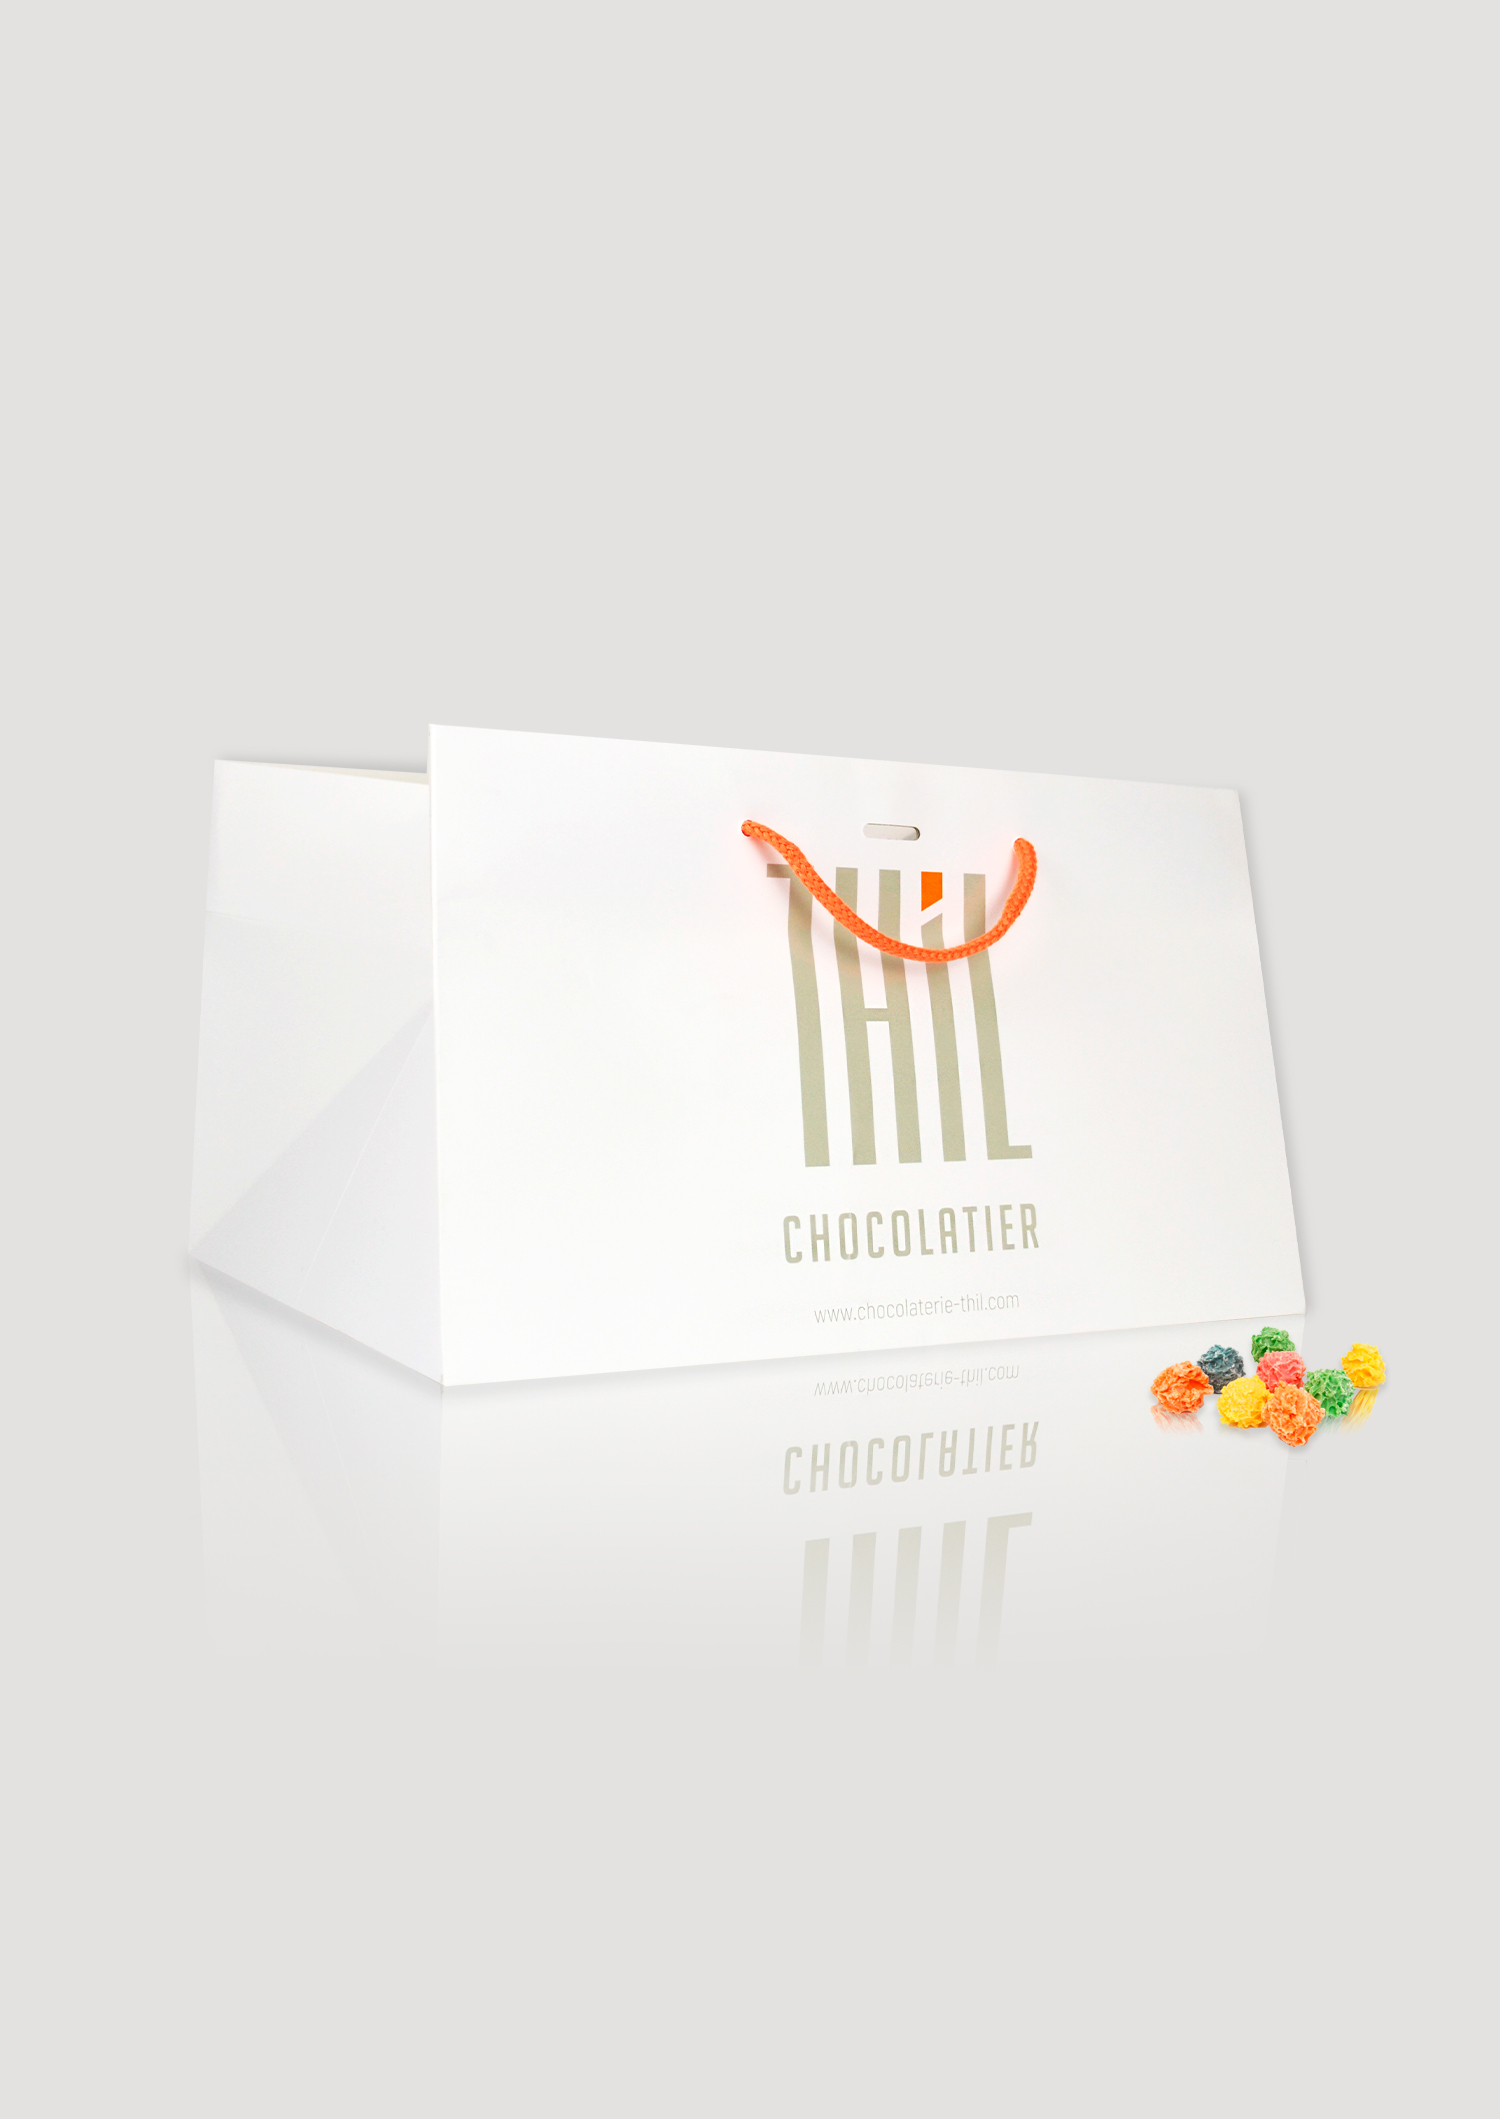 chocolaterie-Thil-luxe